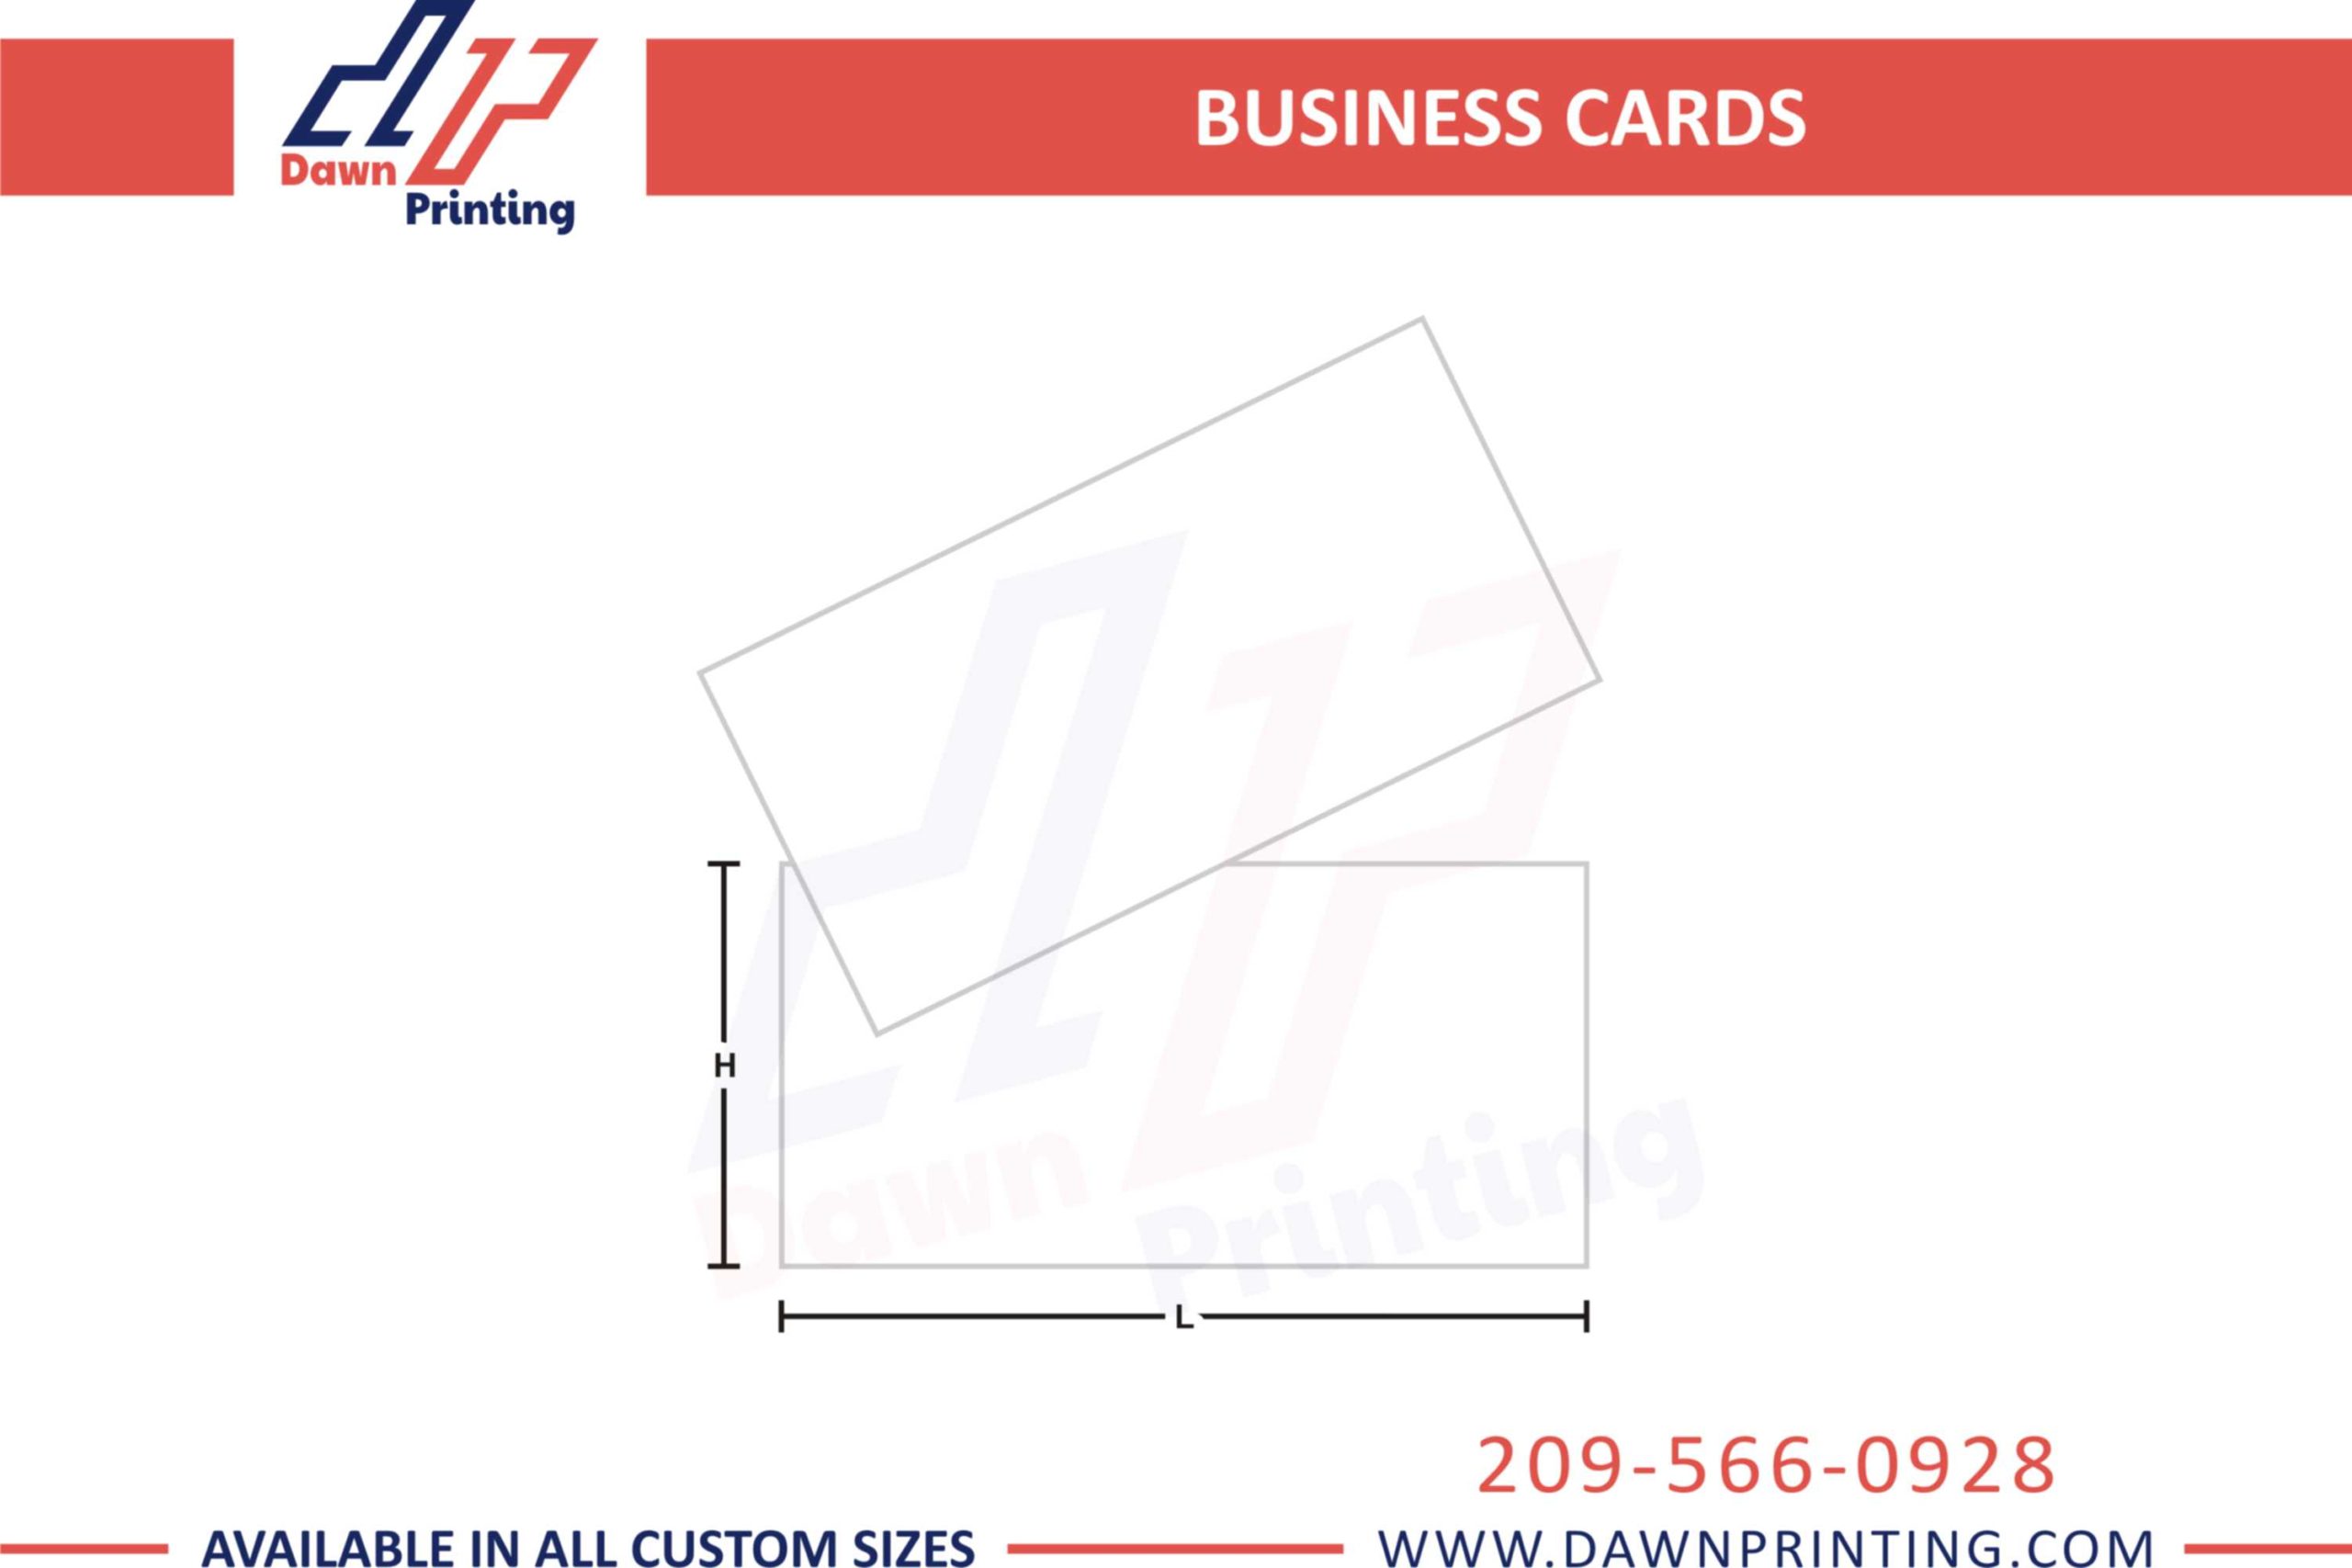 Business Cards Template - Dawn Printing